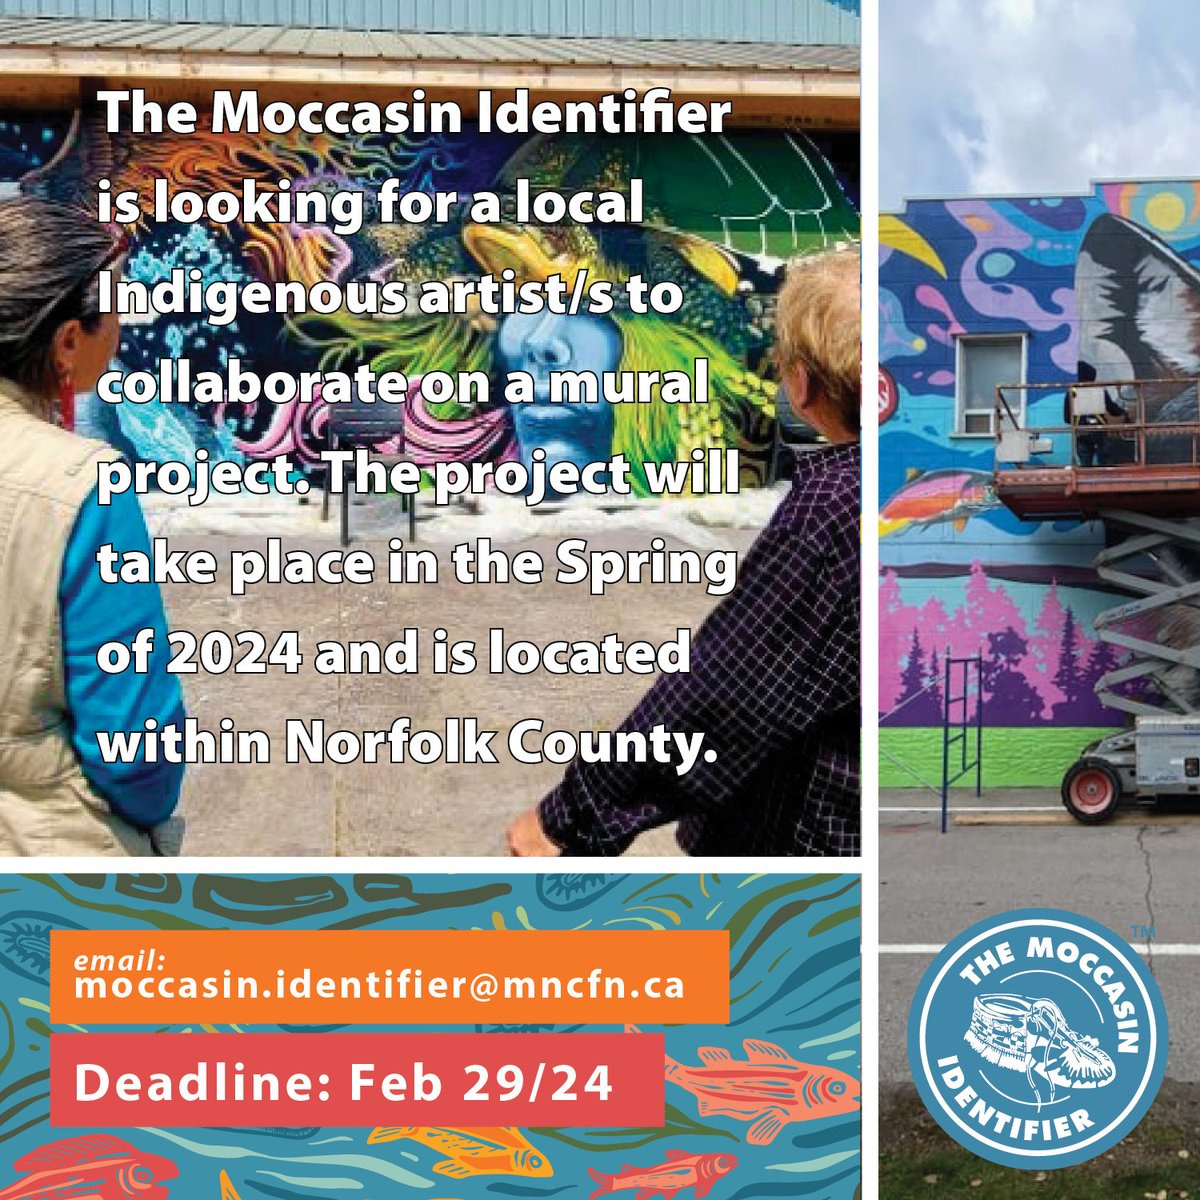 Calling all Indigenous artists for a mural collaboration! Join the Moccasin Identifier project in Norfolk County this Spring 2024. Email moccasin.identifier@mncfn.ca by Feb 29, 2024. #Murals #IndigenousArtists #CommunityArt @LPWBR